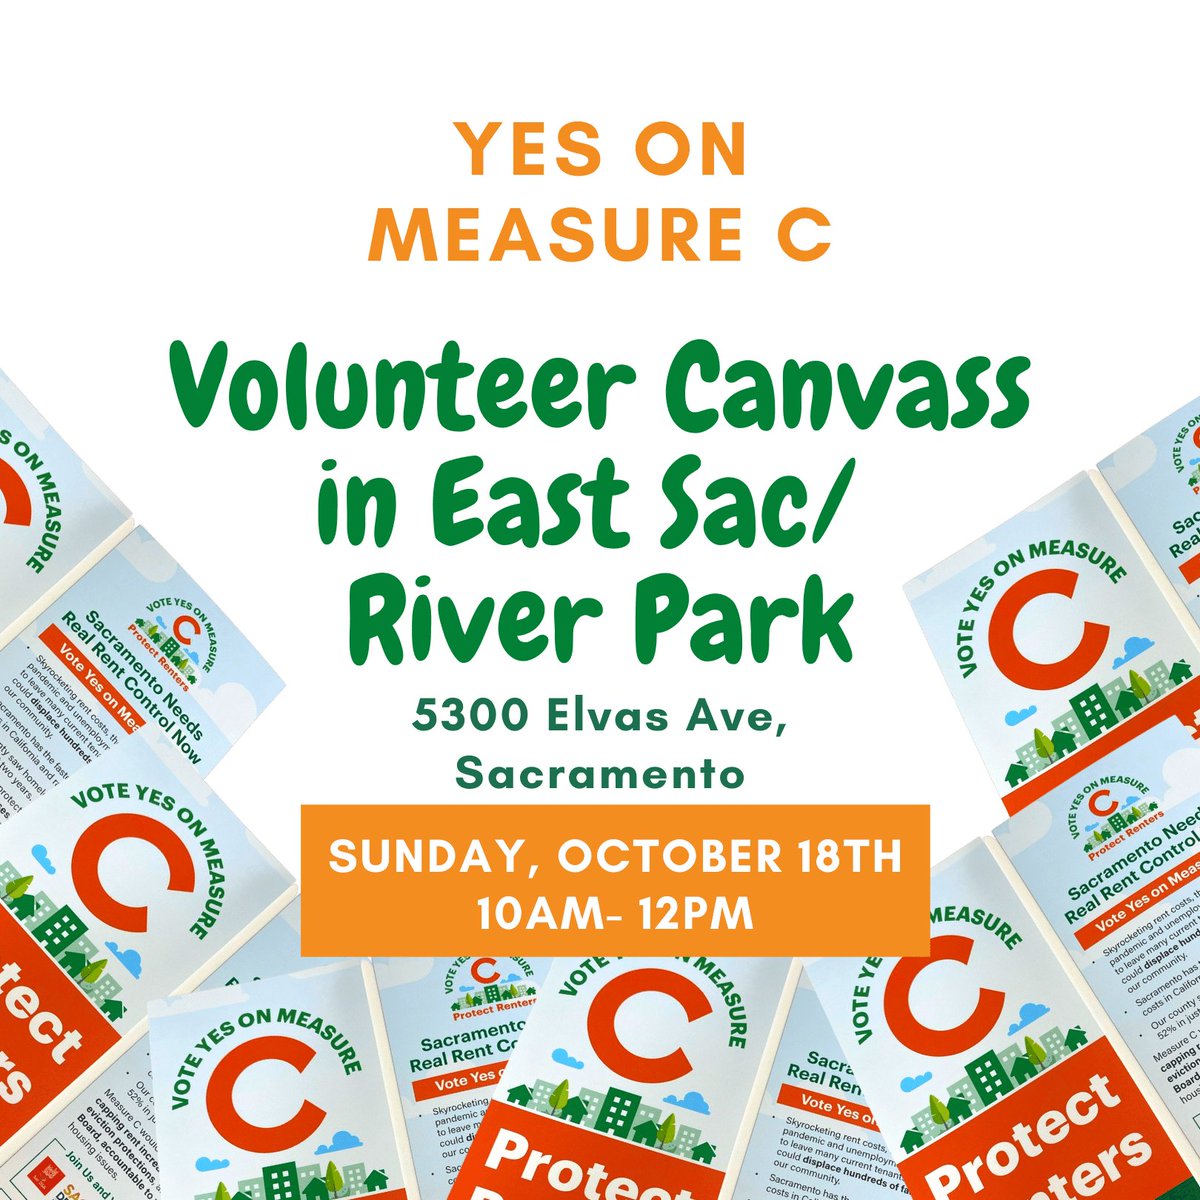 Time to pound the pavement for Measure C to #ProtectRenters! Contactless canvass and lit drop with us this Sunday 10/16 at 10 am in East Sac and River Park! 

Location: @SacTeachers union hall at 5300 Elvas Ave.
facebook.com/events/3583381…